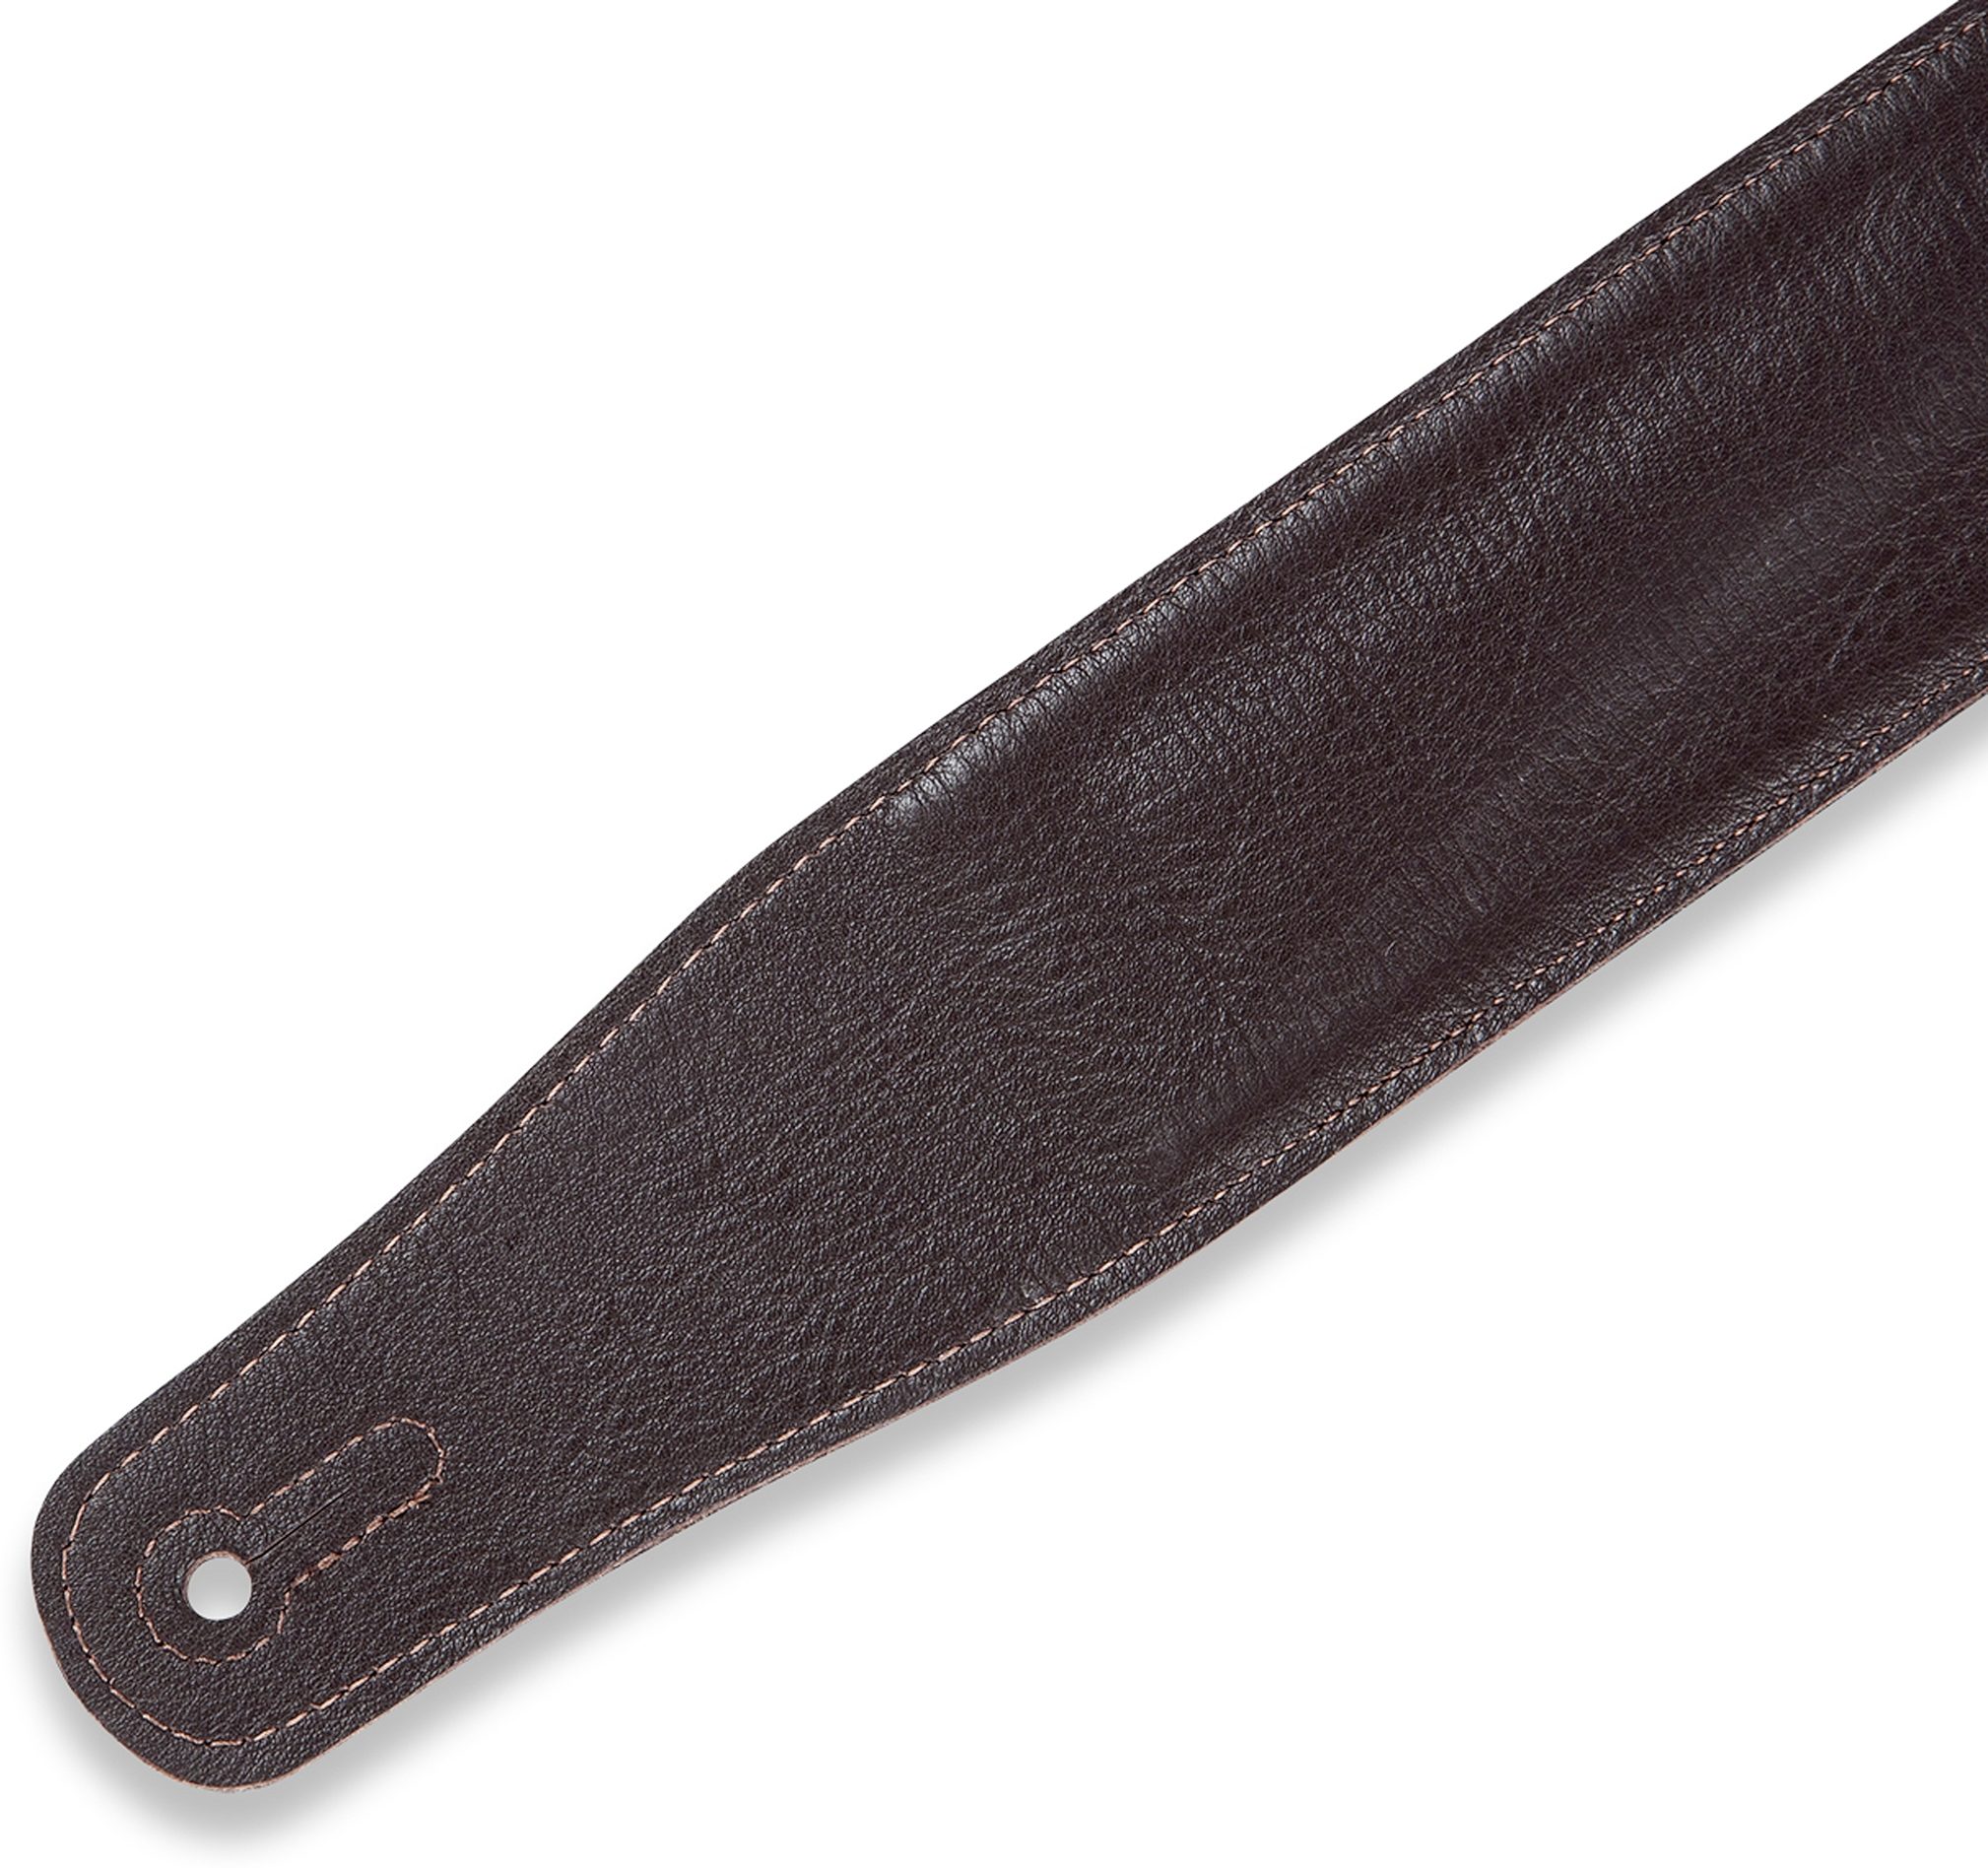 Levy's Amped Tweed Leather Guitar Strap | zZounds